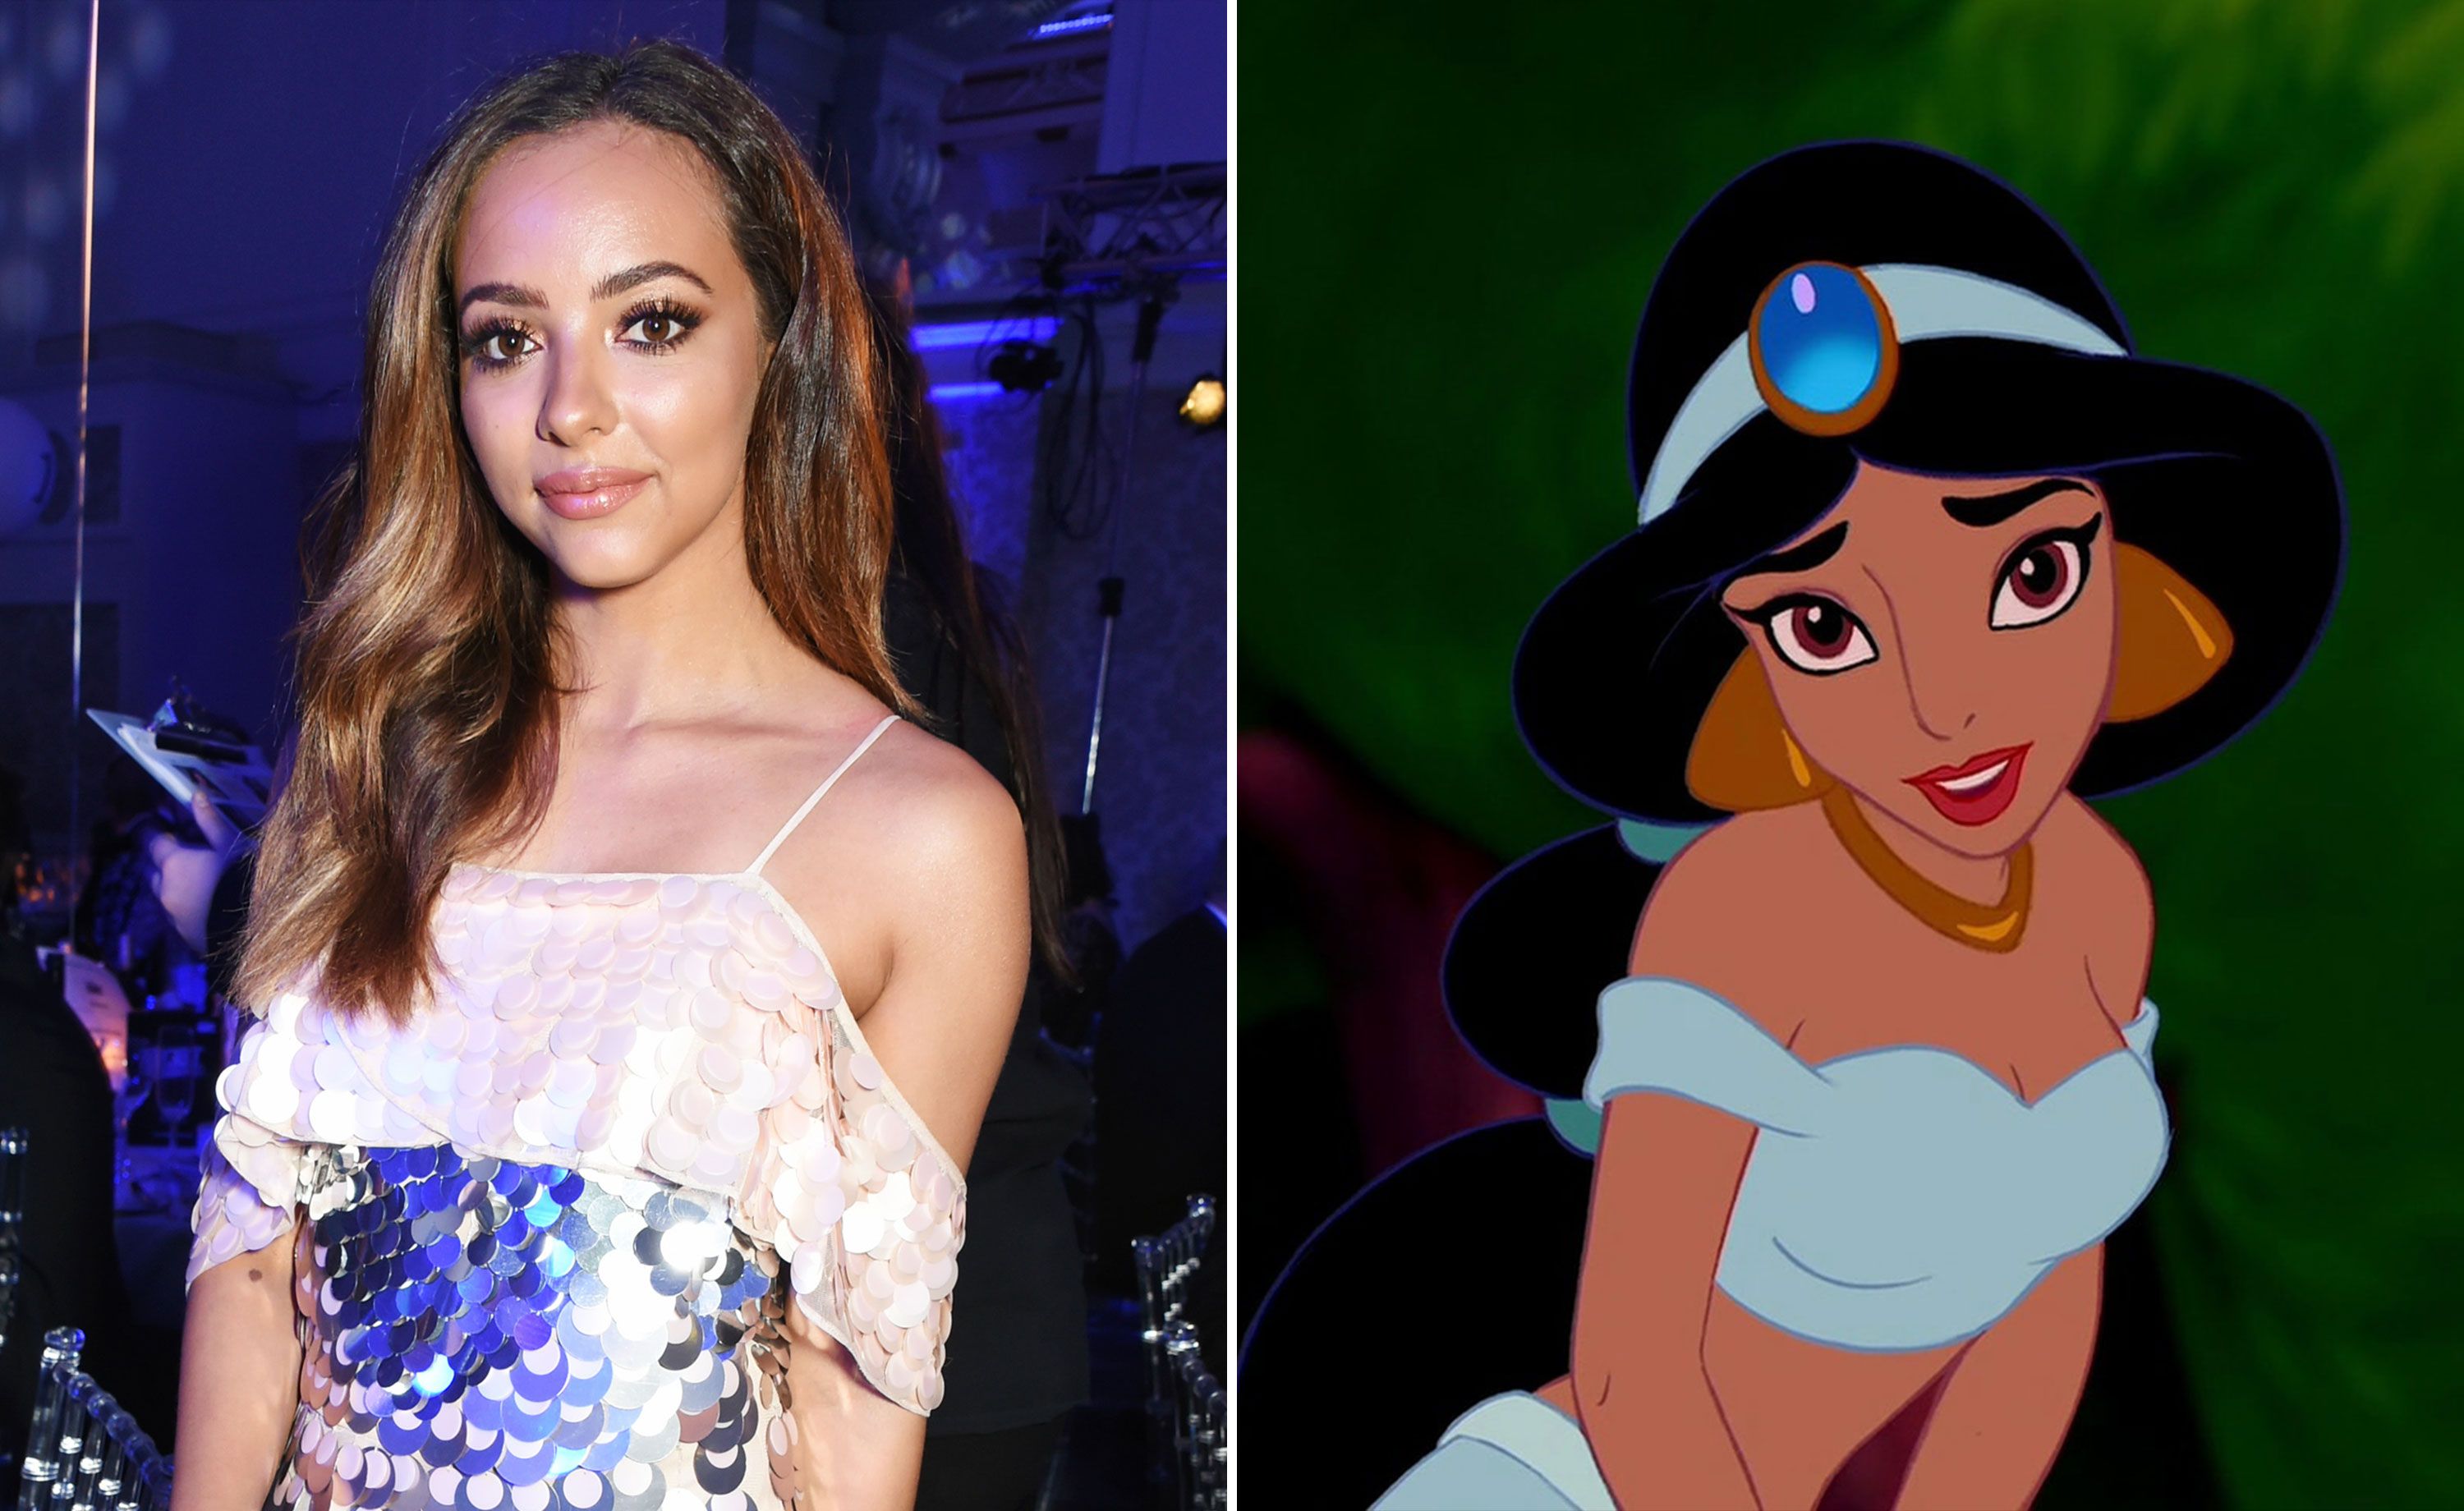 Little Mix's Jade Thirlwall makes subtle dig at Disney after not being cast  as Princess Jasmine in Aladdin remake